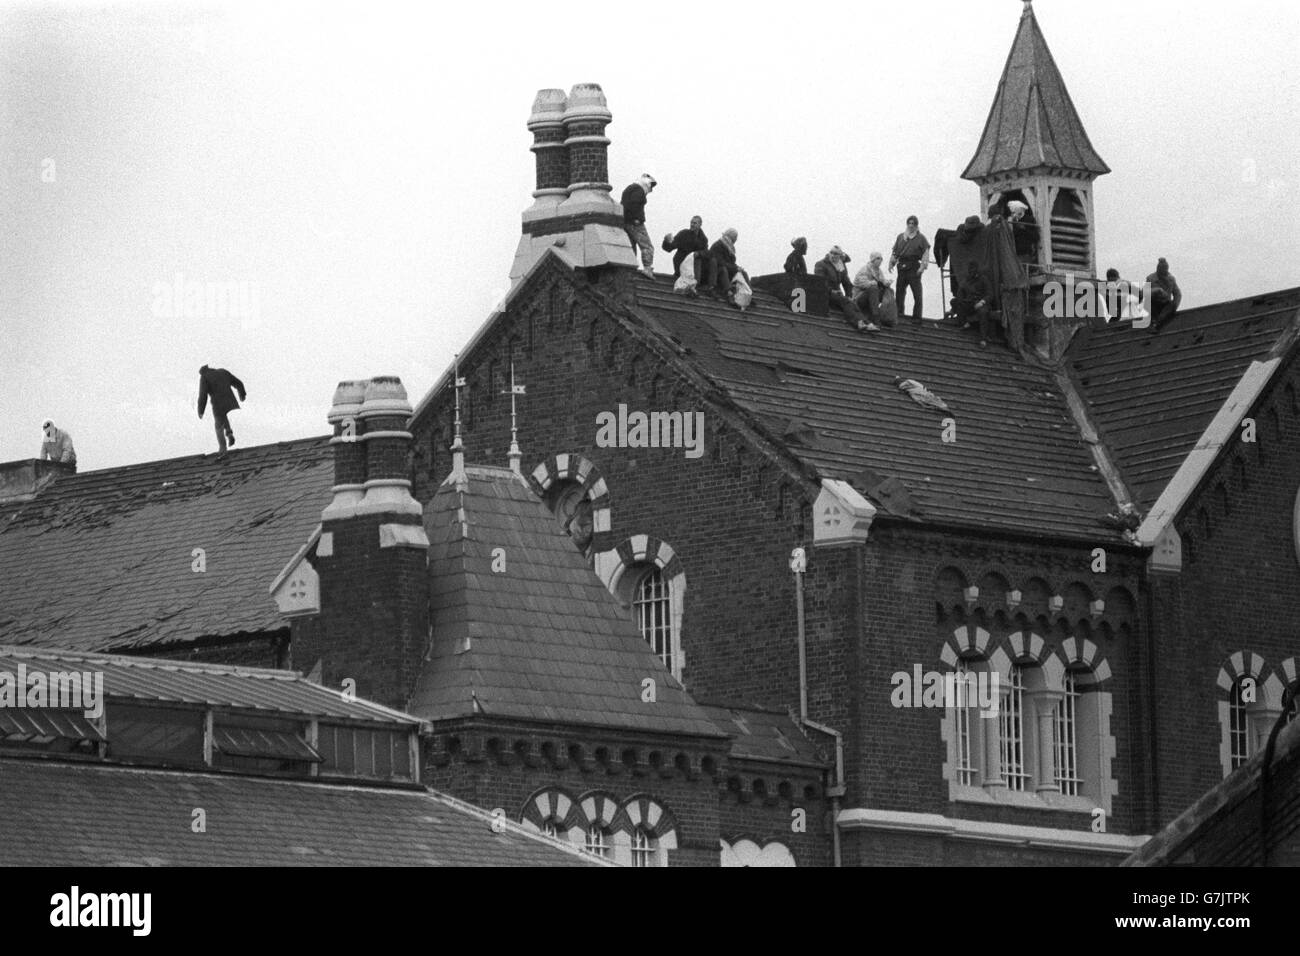 Prisoners take up their rooftop positions during rioting at Strangeways prison in Manchester. Stock Photo